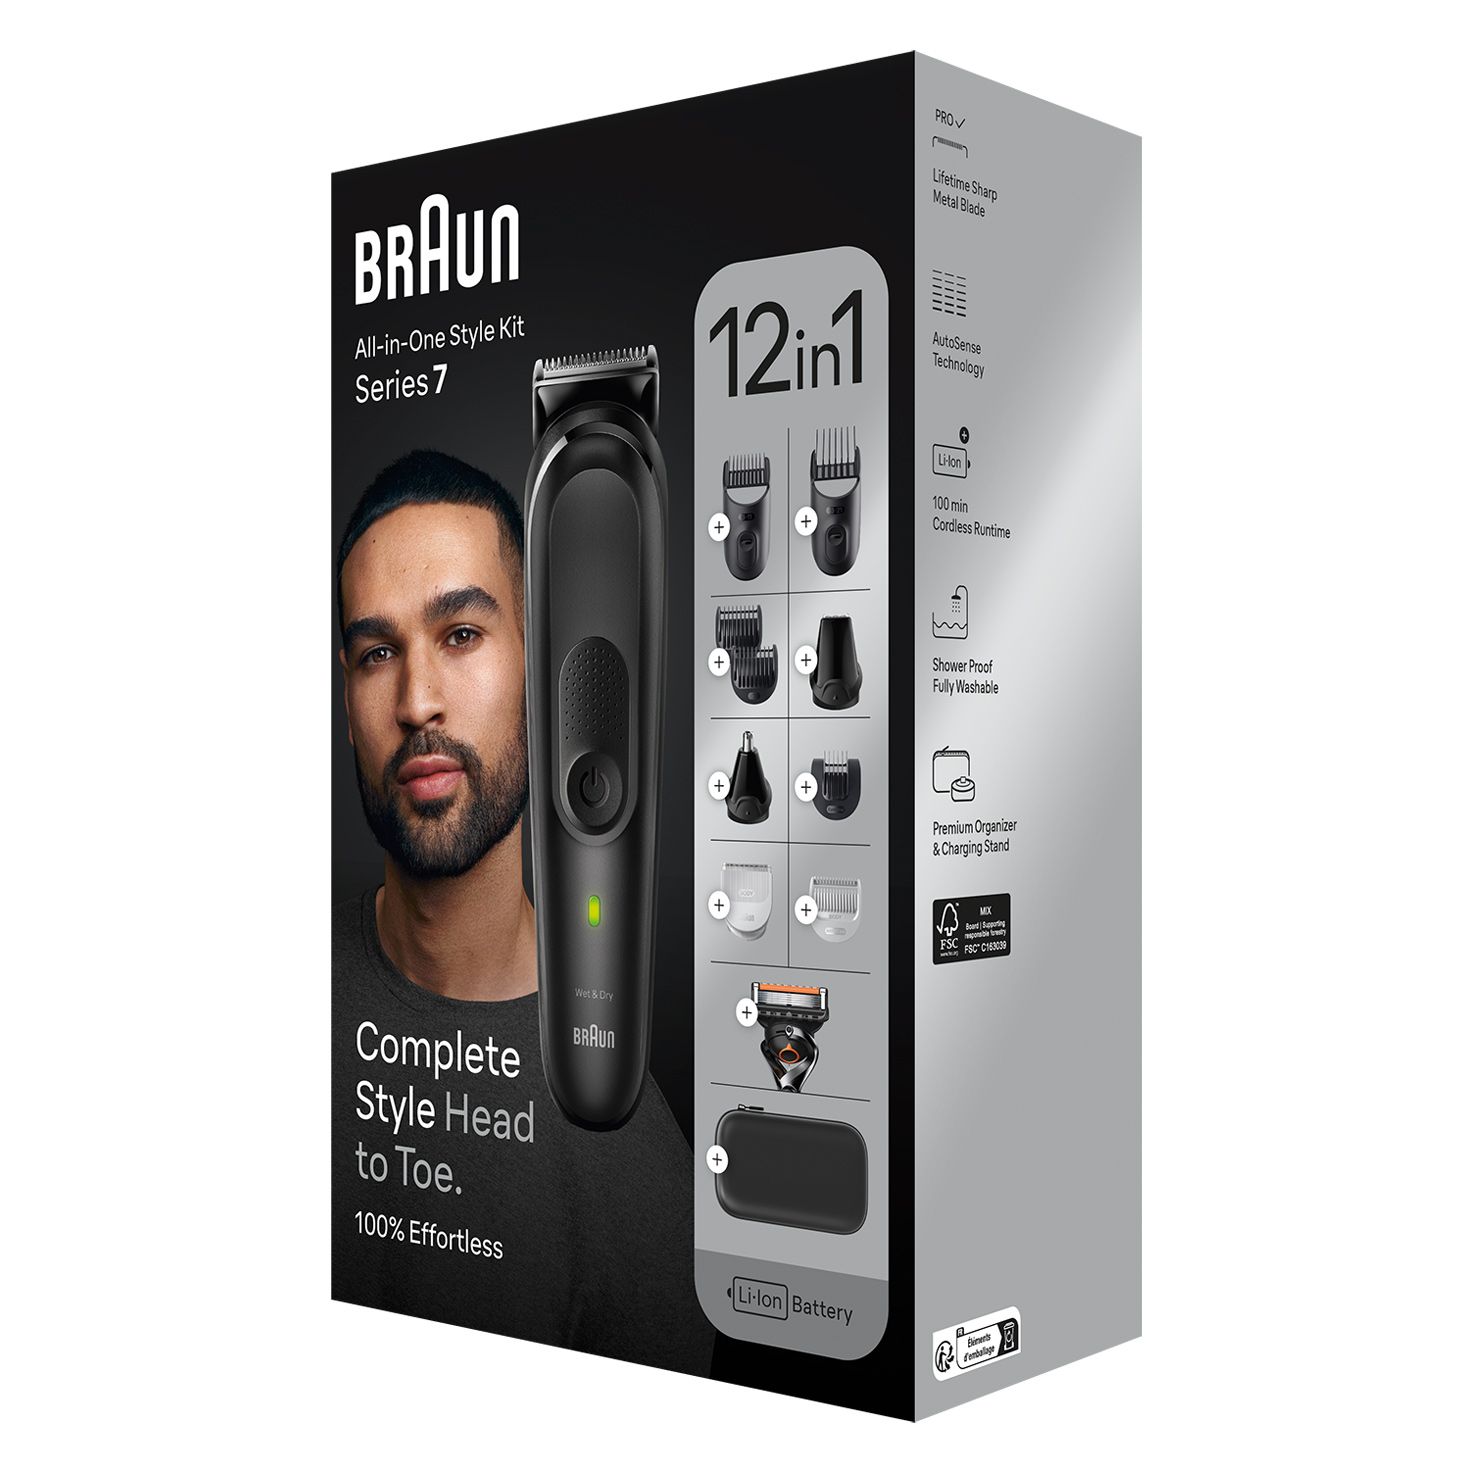 MGK 7460 : Braun's all in one male body grooming kit